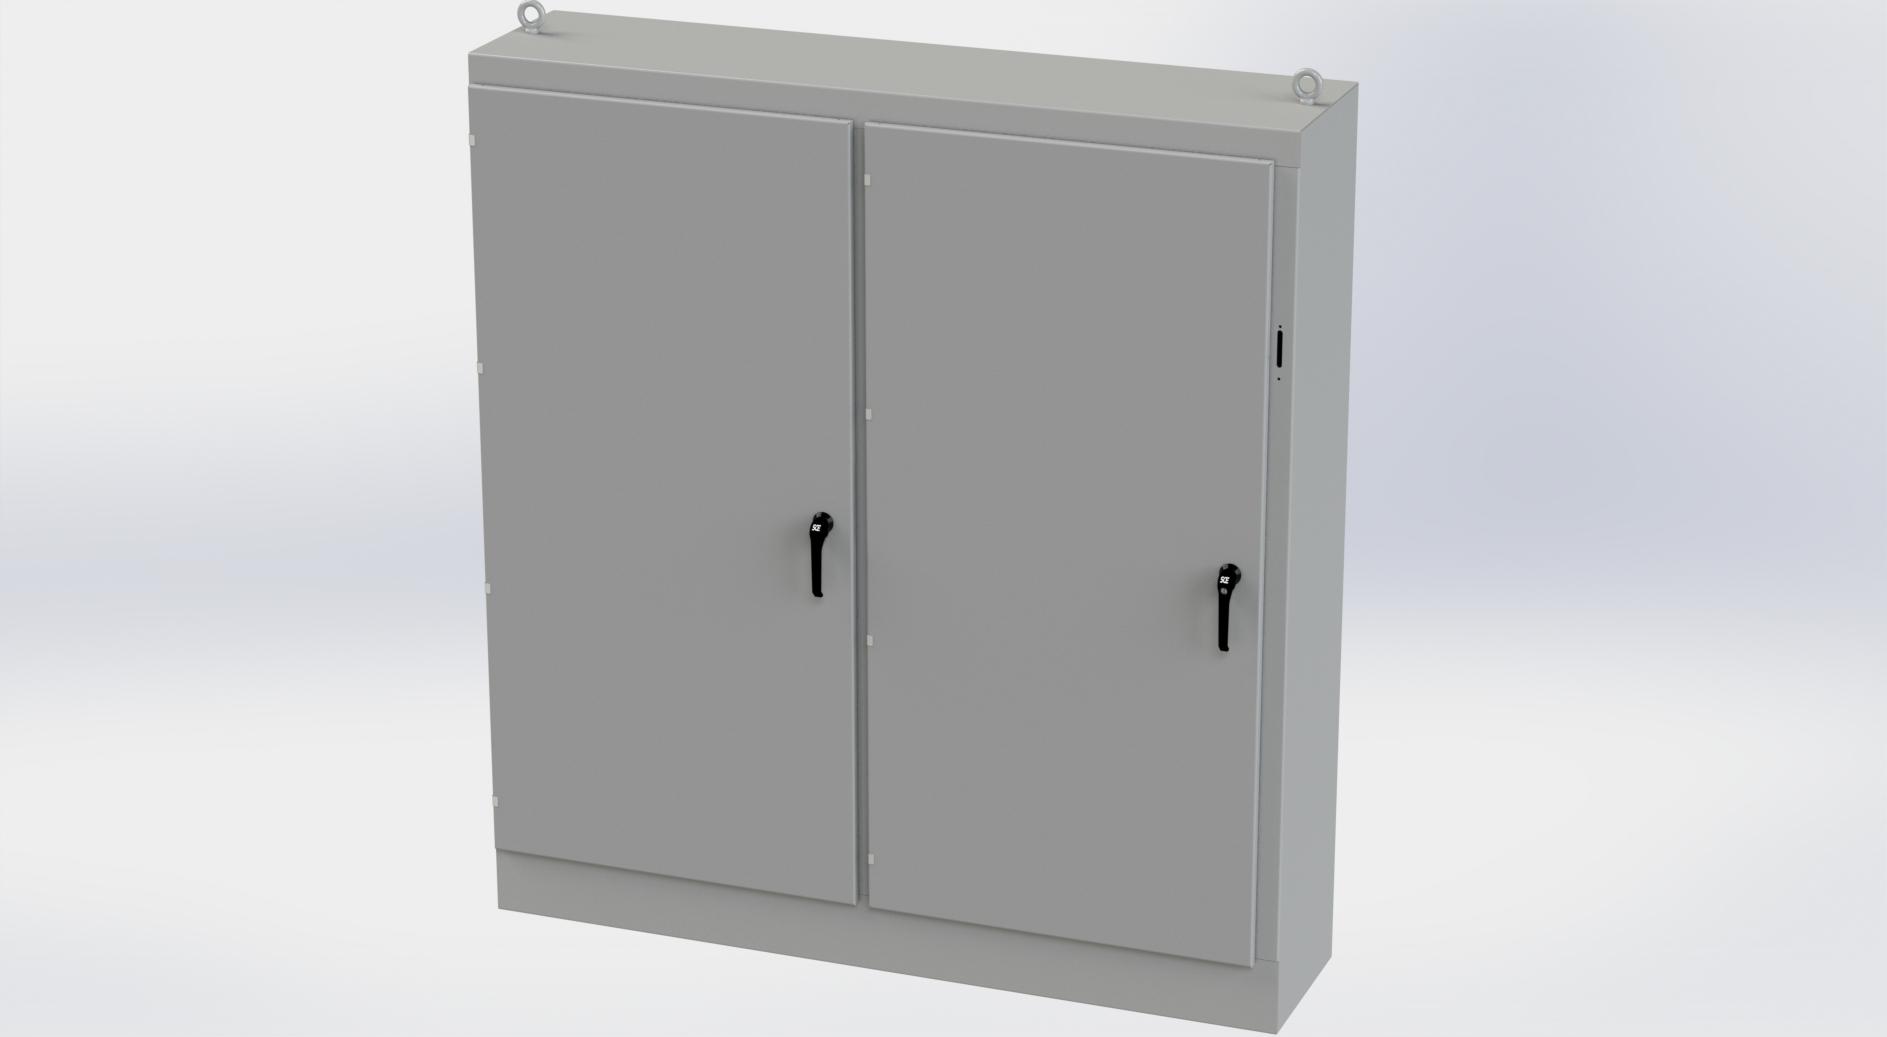 Saginaw Control SCE-84XM7818 2DR XM Enclosure, Height:84.00", Width:77.75", Depth:18.00", ANSI-61 gray powder coating inside and out. Sub-panels are powder coated white.